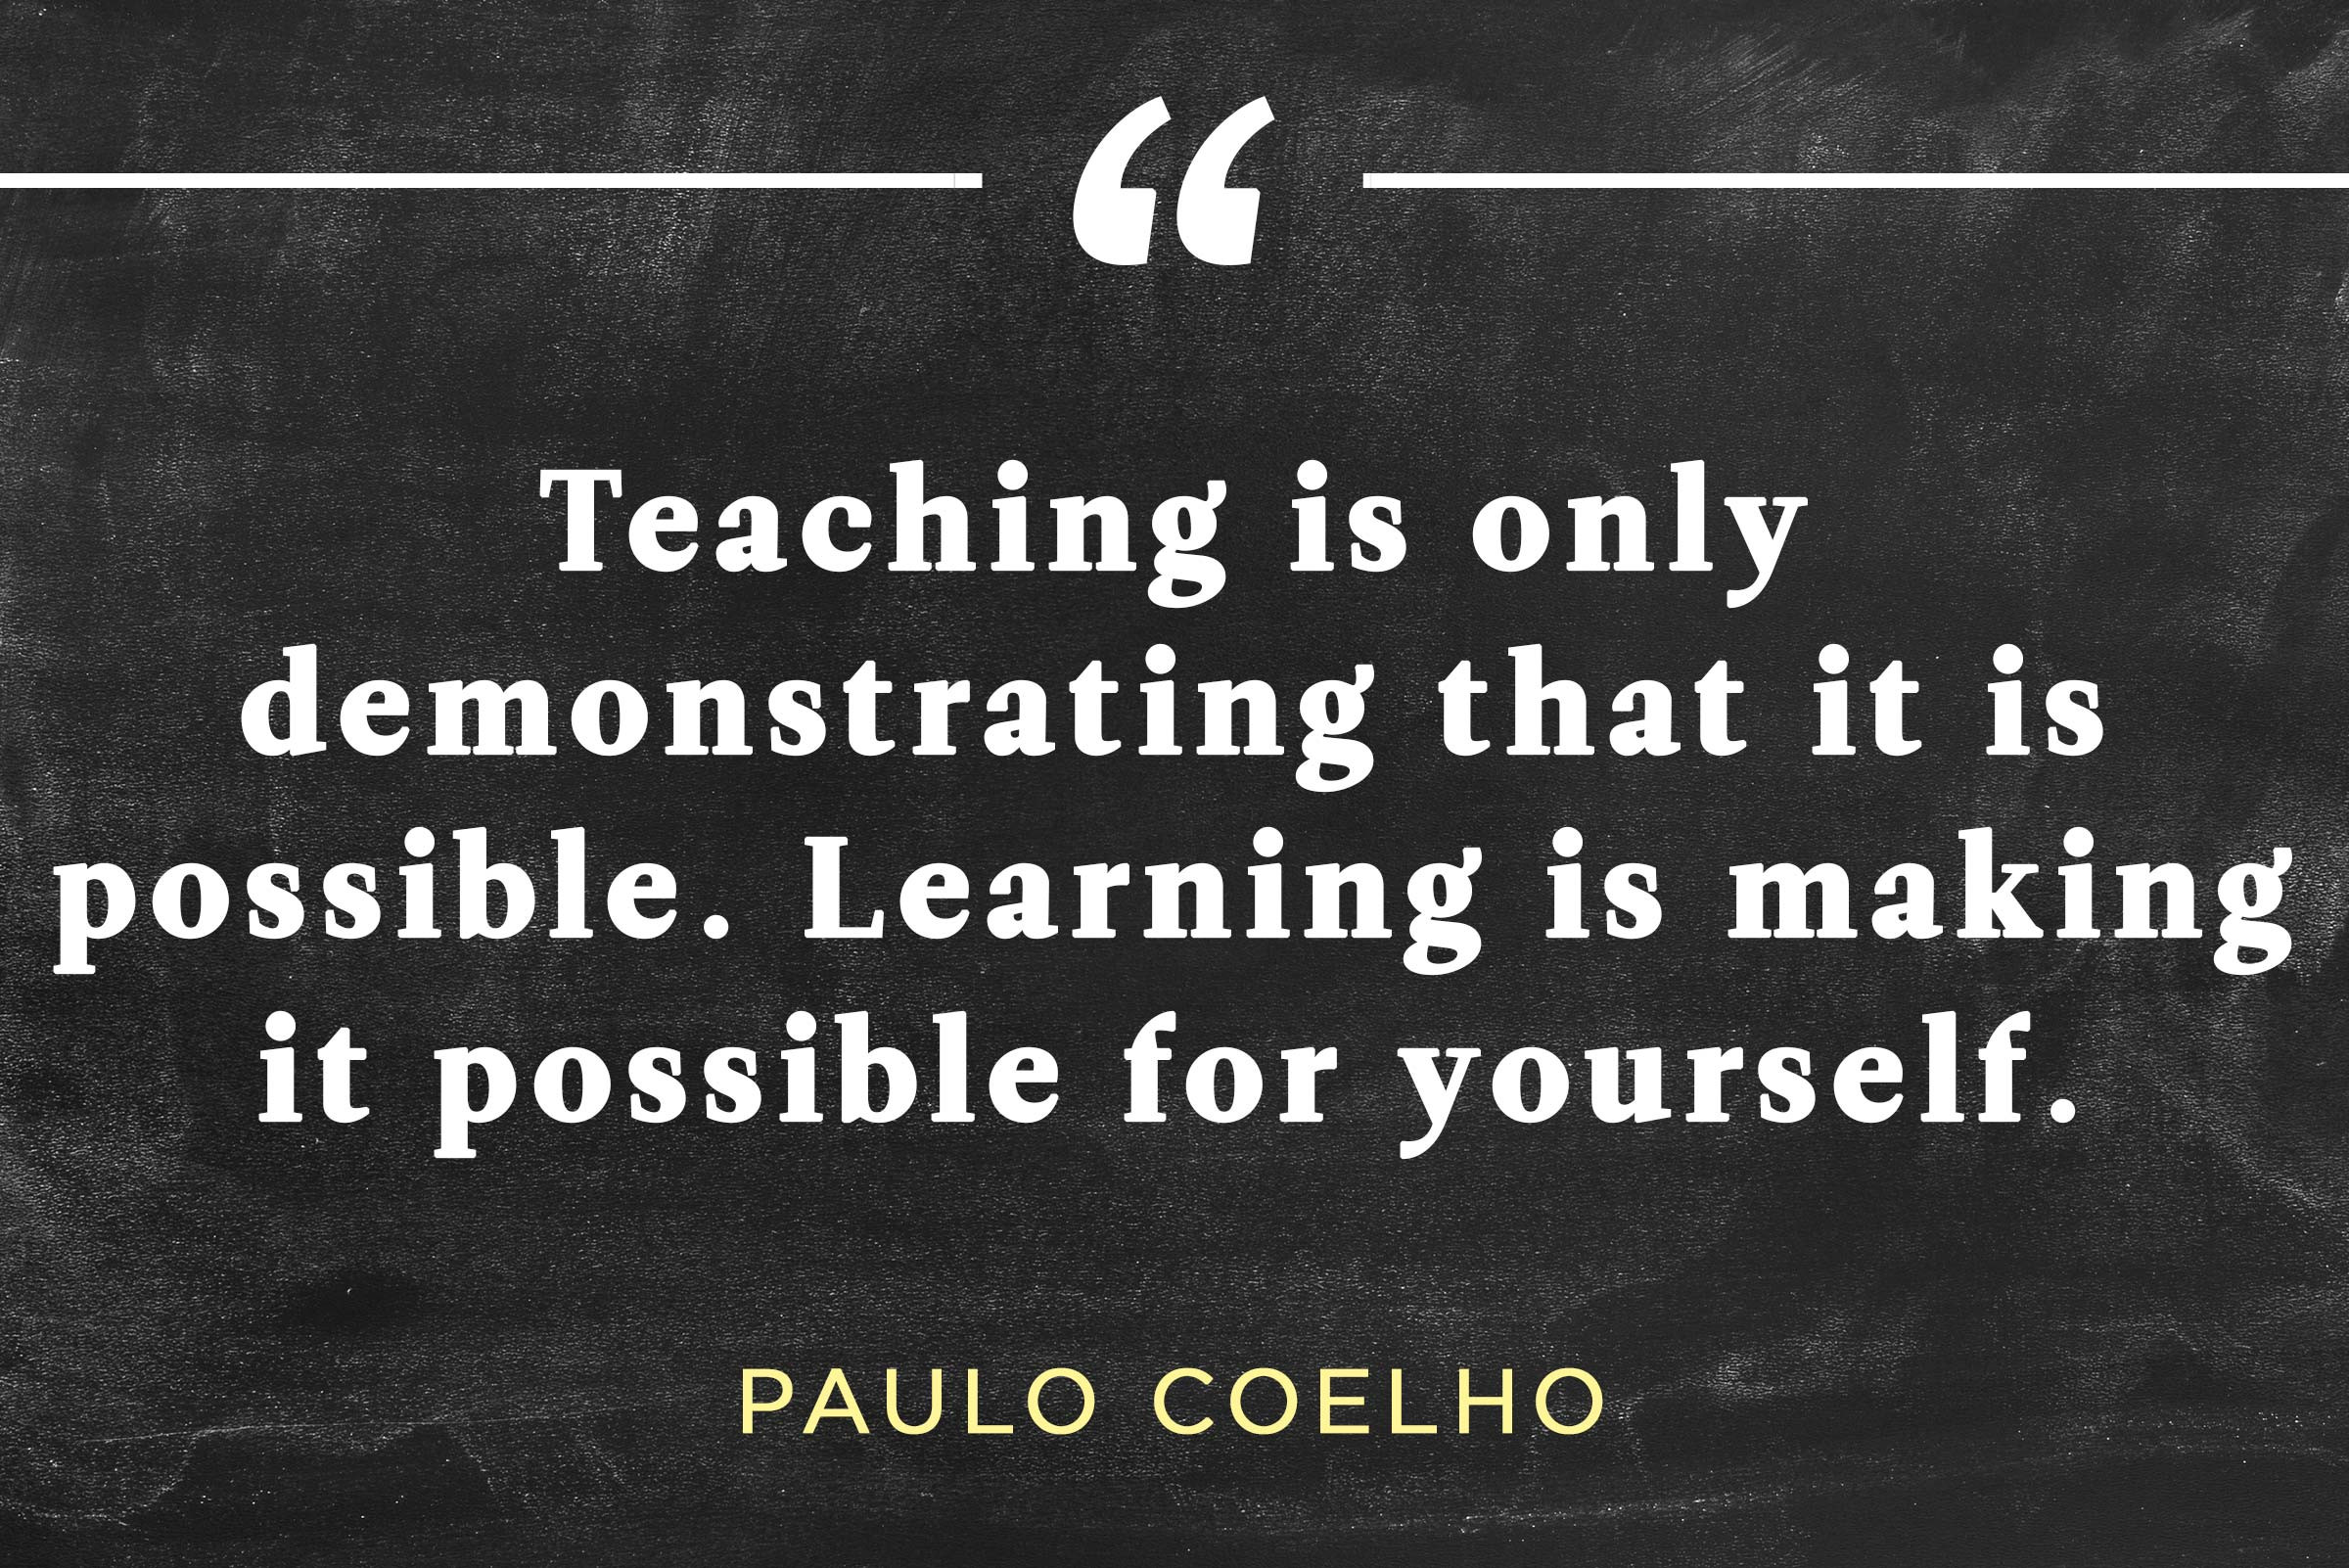 Inspiration Quotes About Education
 Inspirational Teacher Quotes